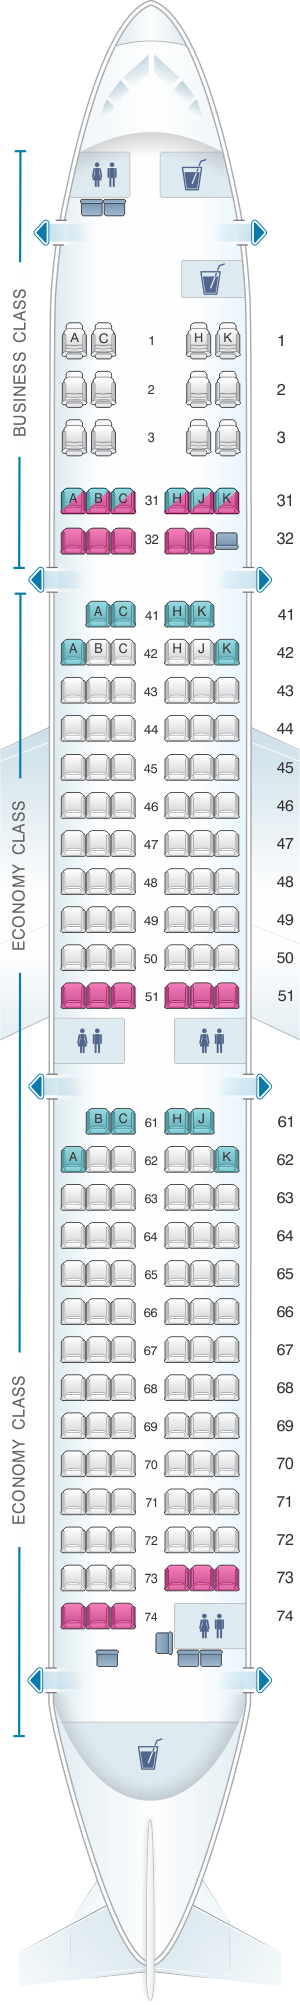 Hawaiian Airlines A321neo Seat Map Tutorial Pics